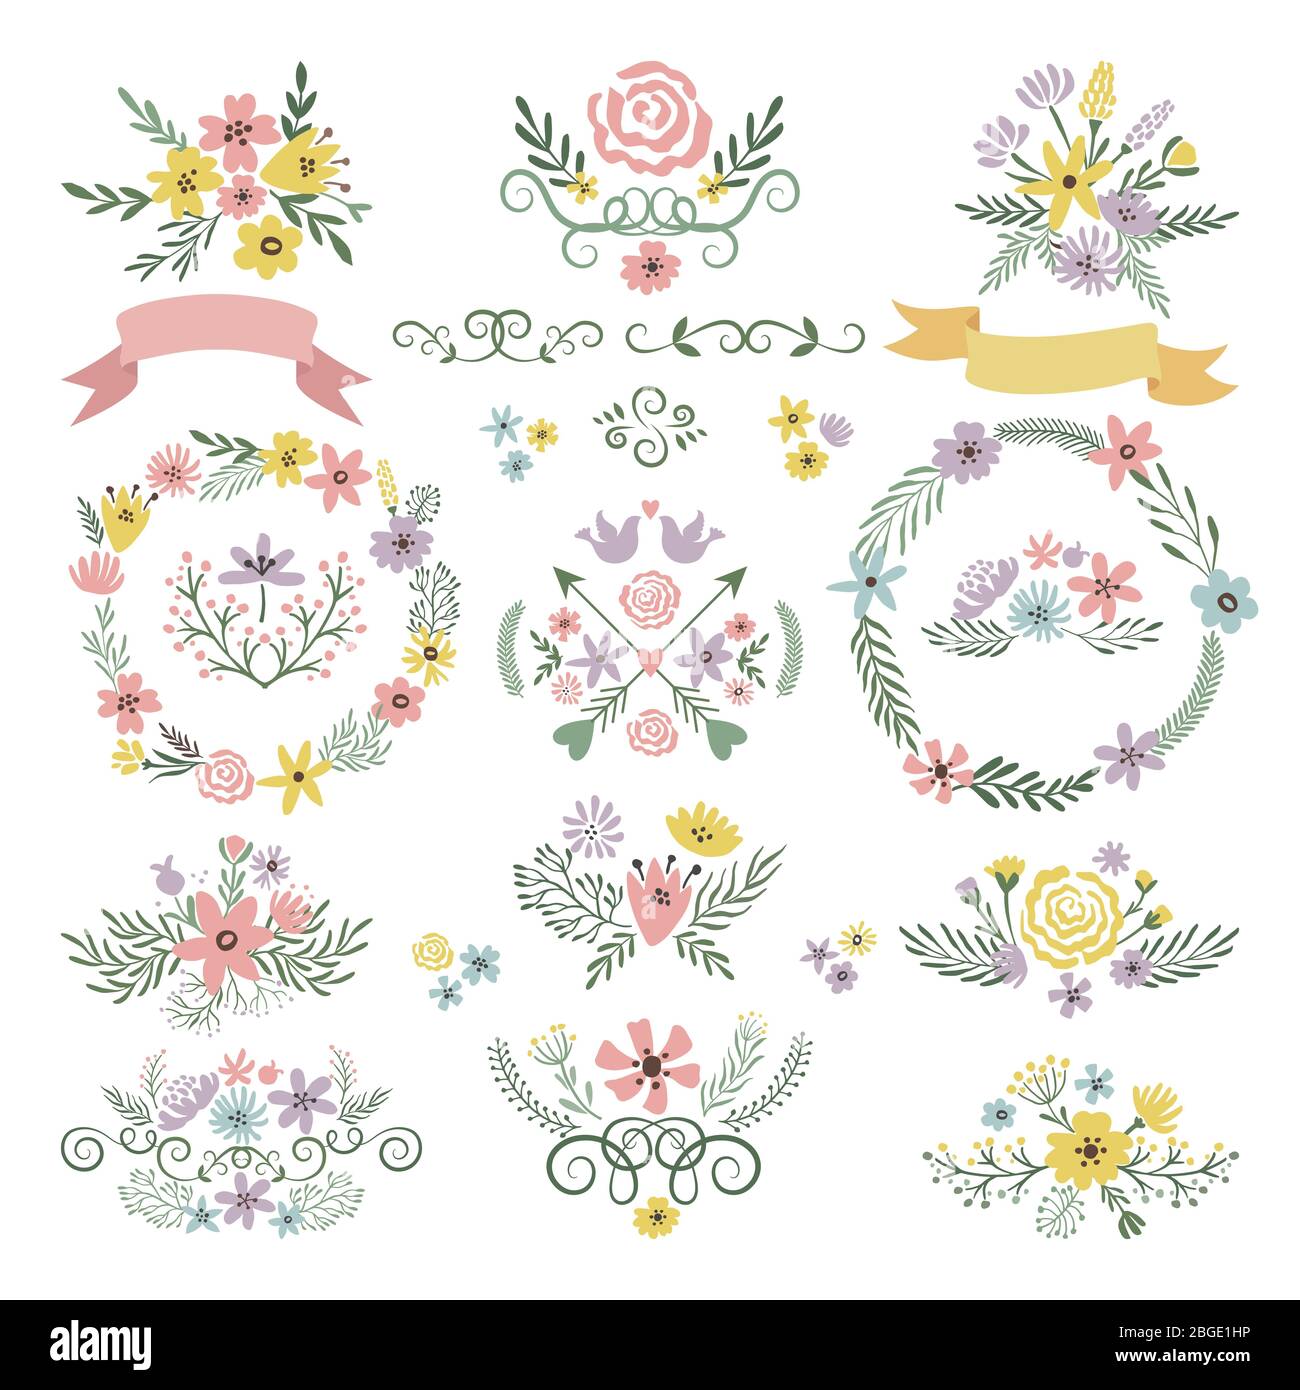 Sweet stickers and vintage labels. Floral elements for wedding